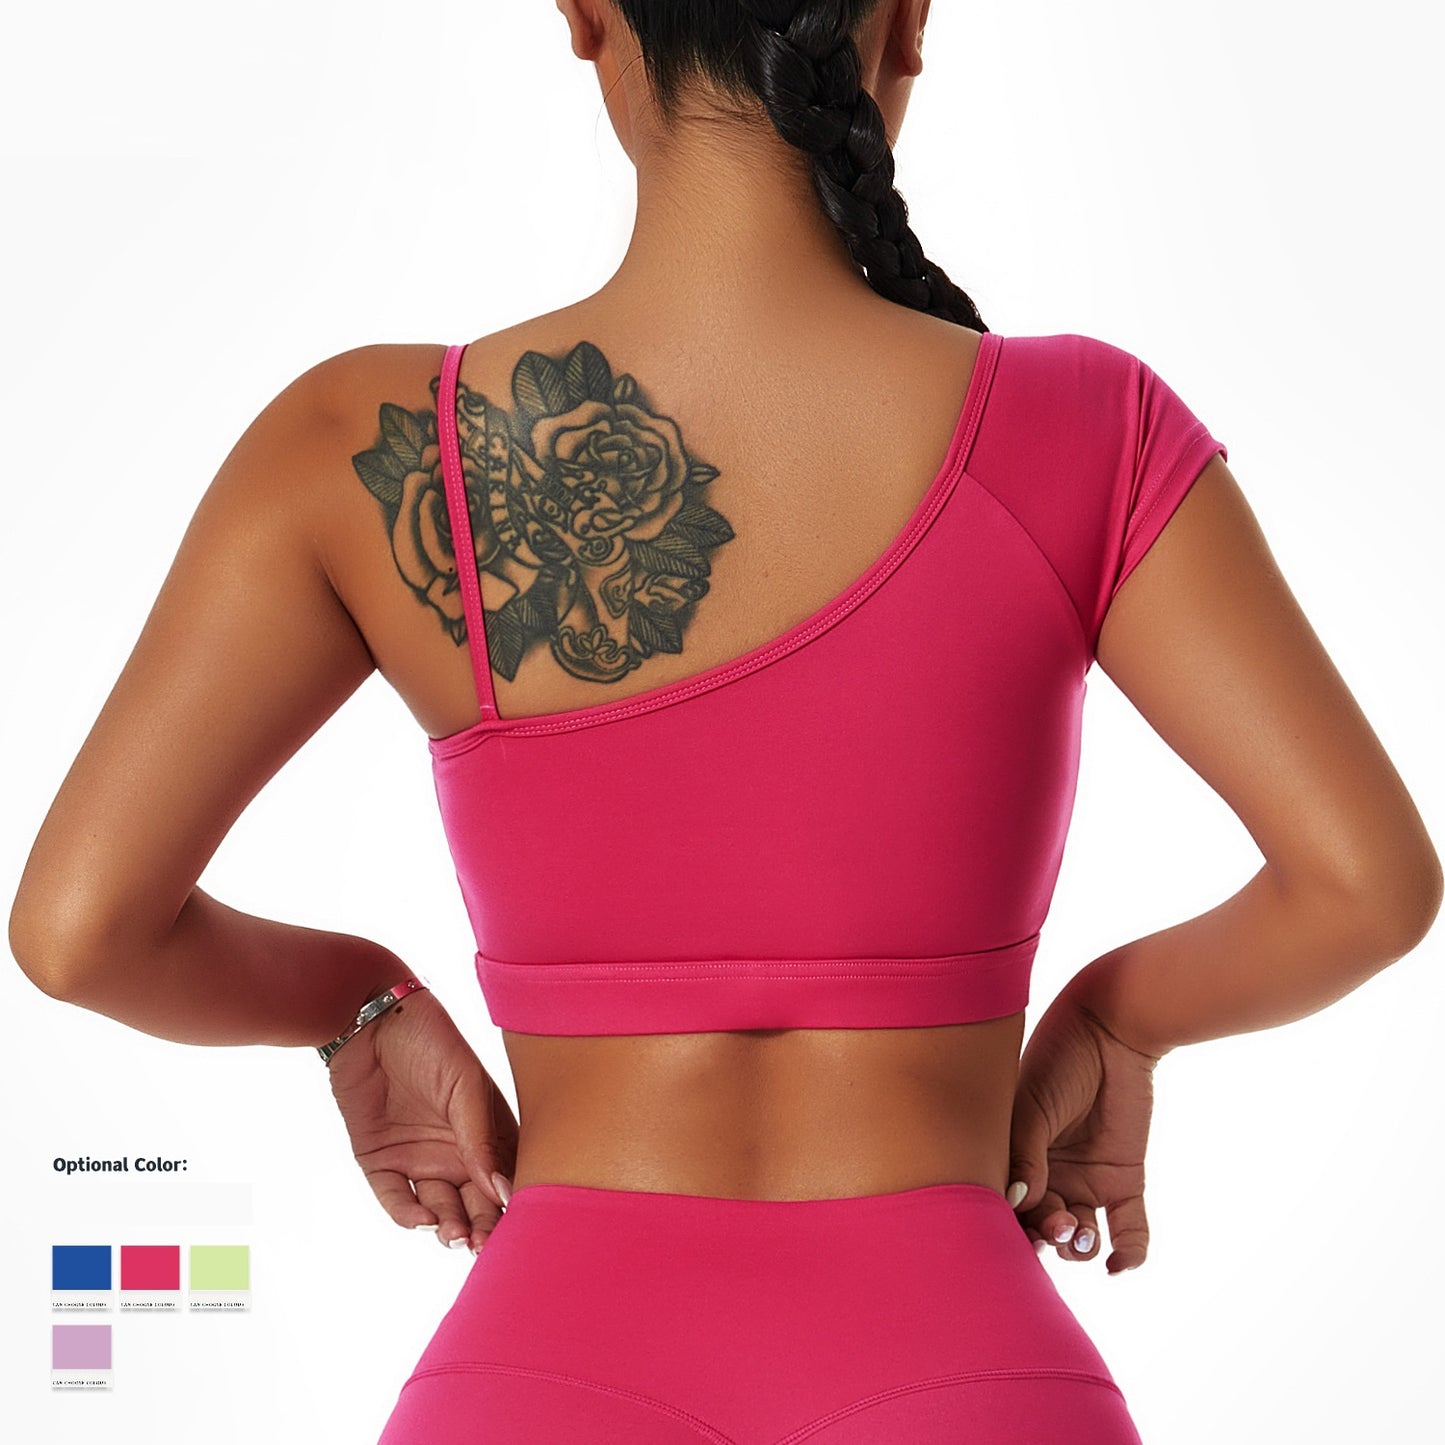 Yoga Suit Women's Running And Cycling Wear Off-shoulder Sports Bra Gym Training Tights